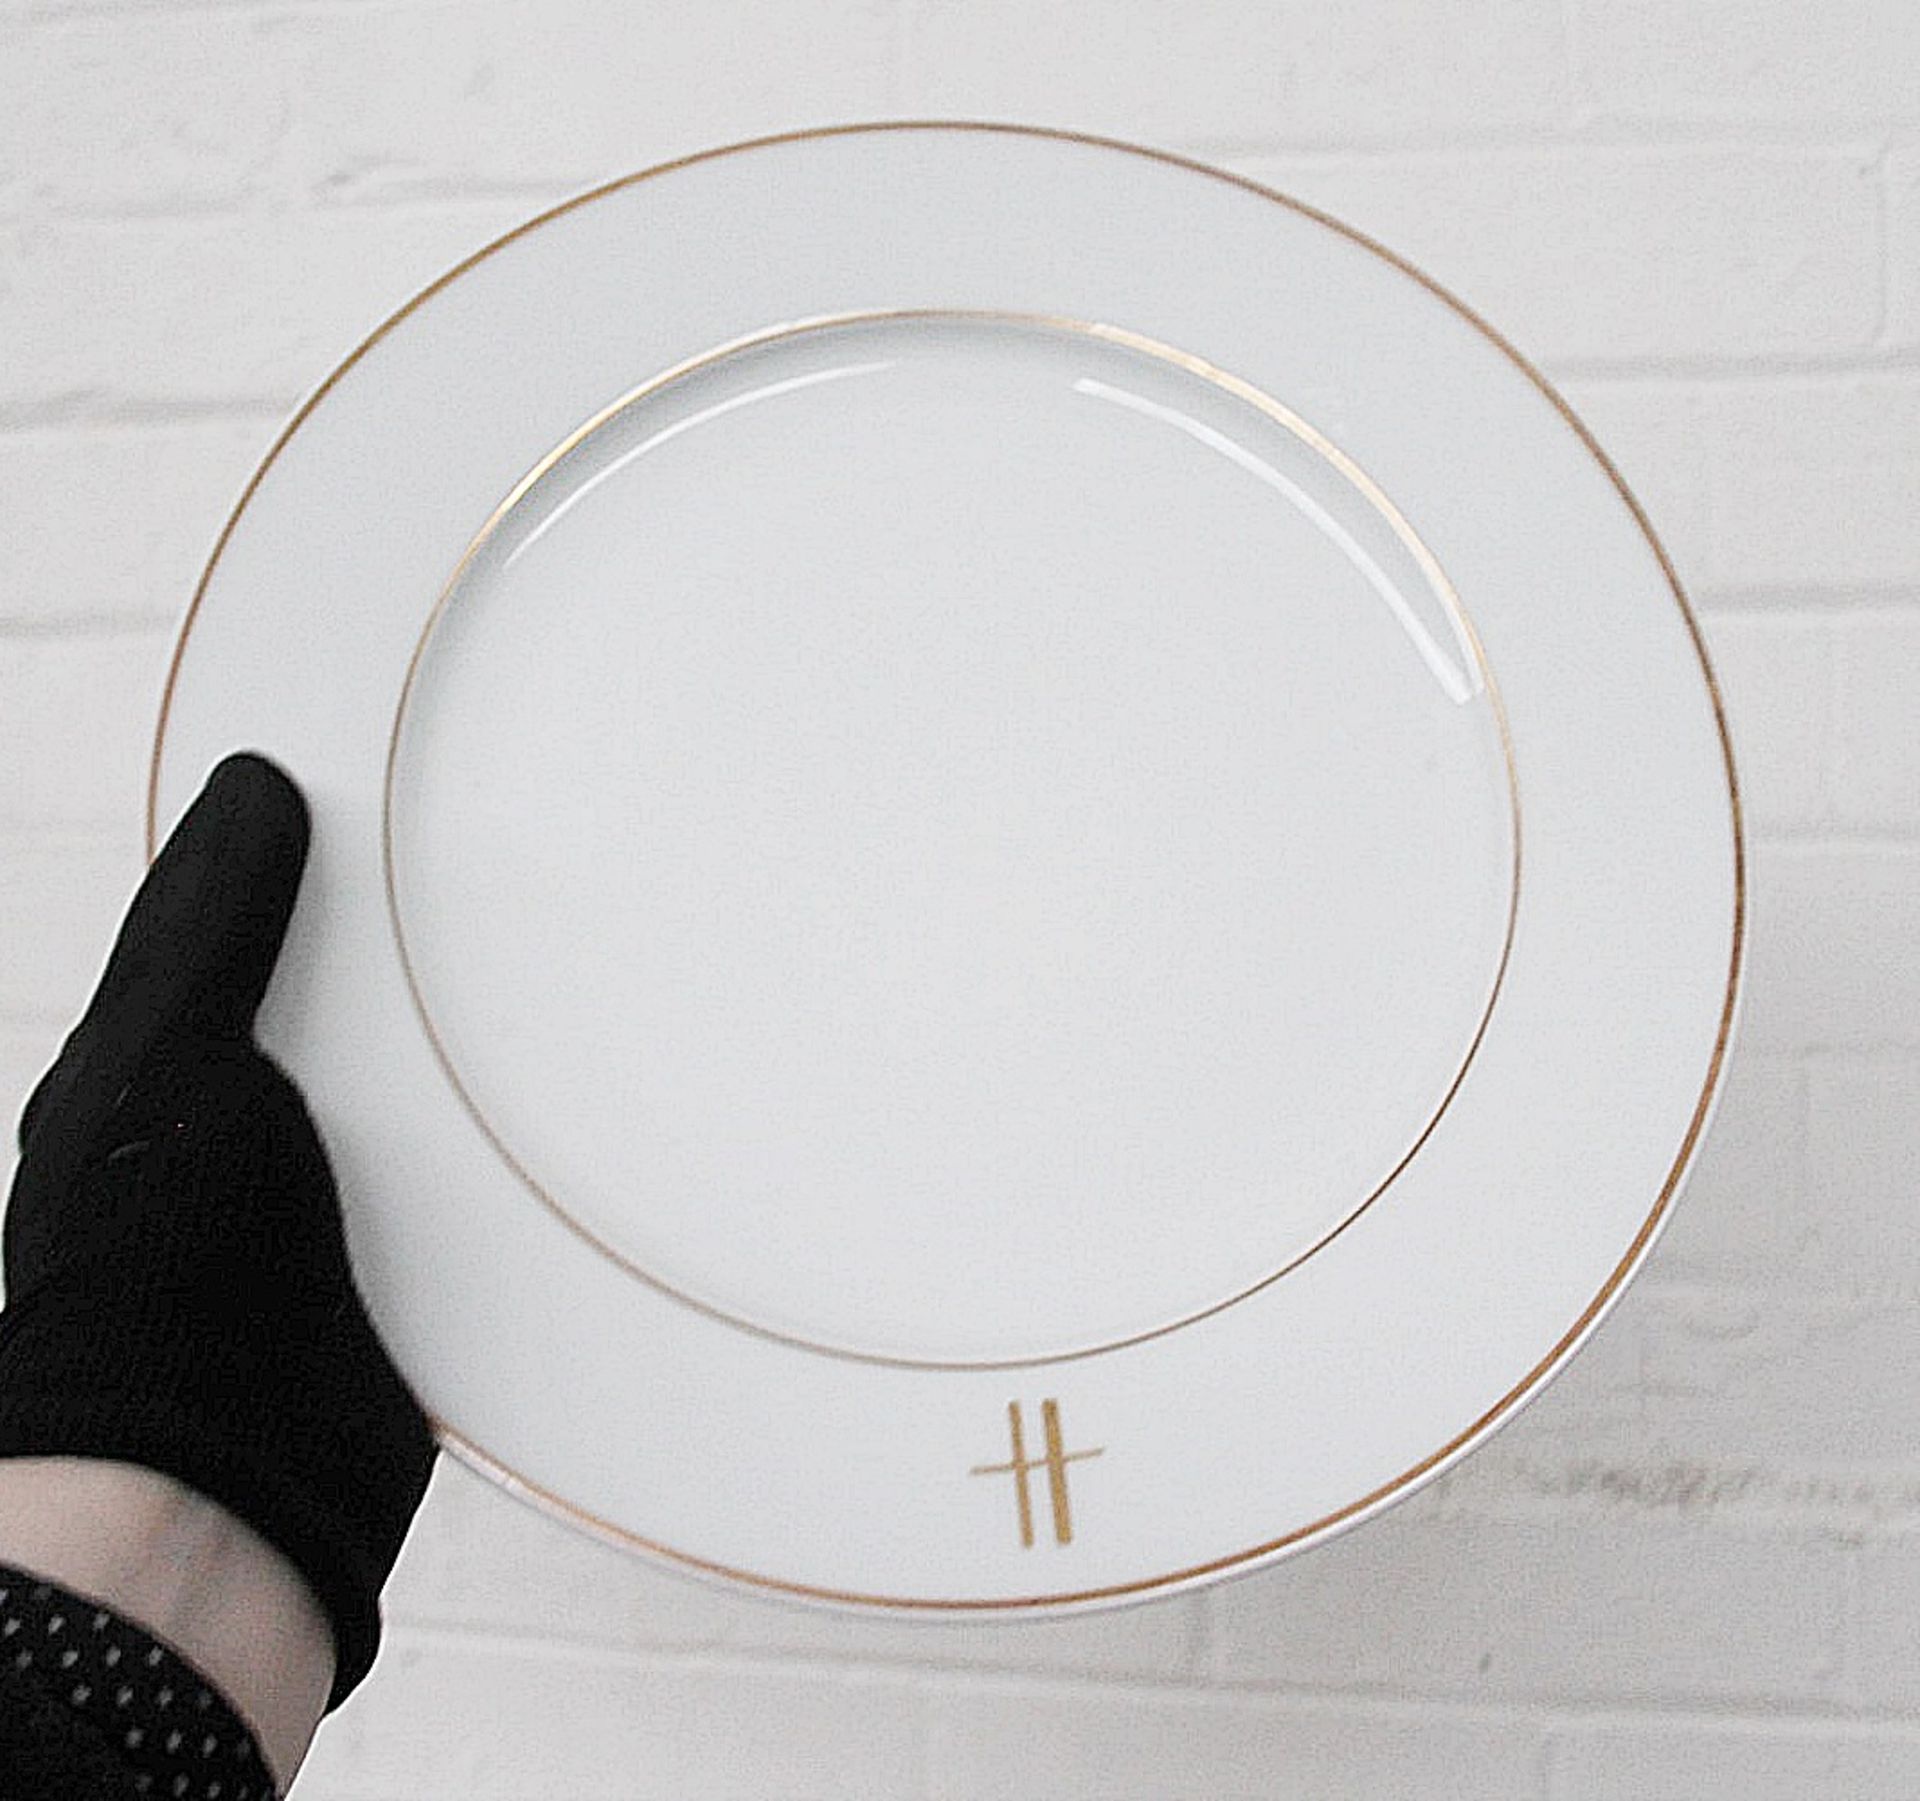 15 x PILLIVUYT Porcelain 30.4cm Large Dinner Charger Plates Featuring 'Famous Branding' In Gold